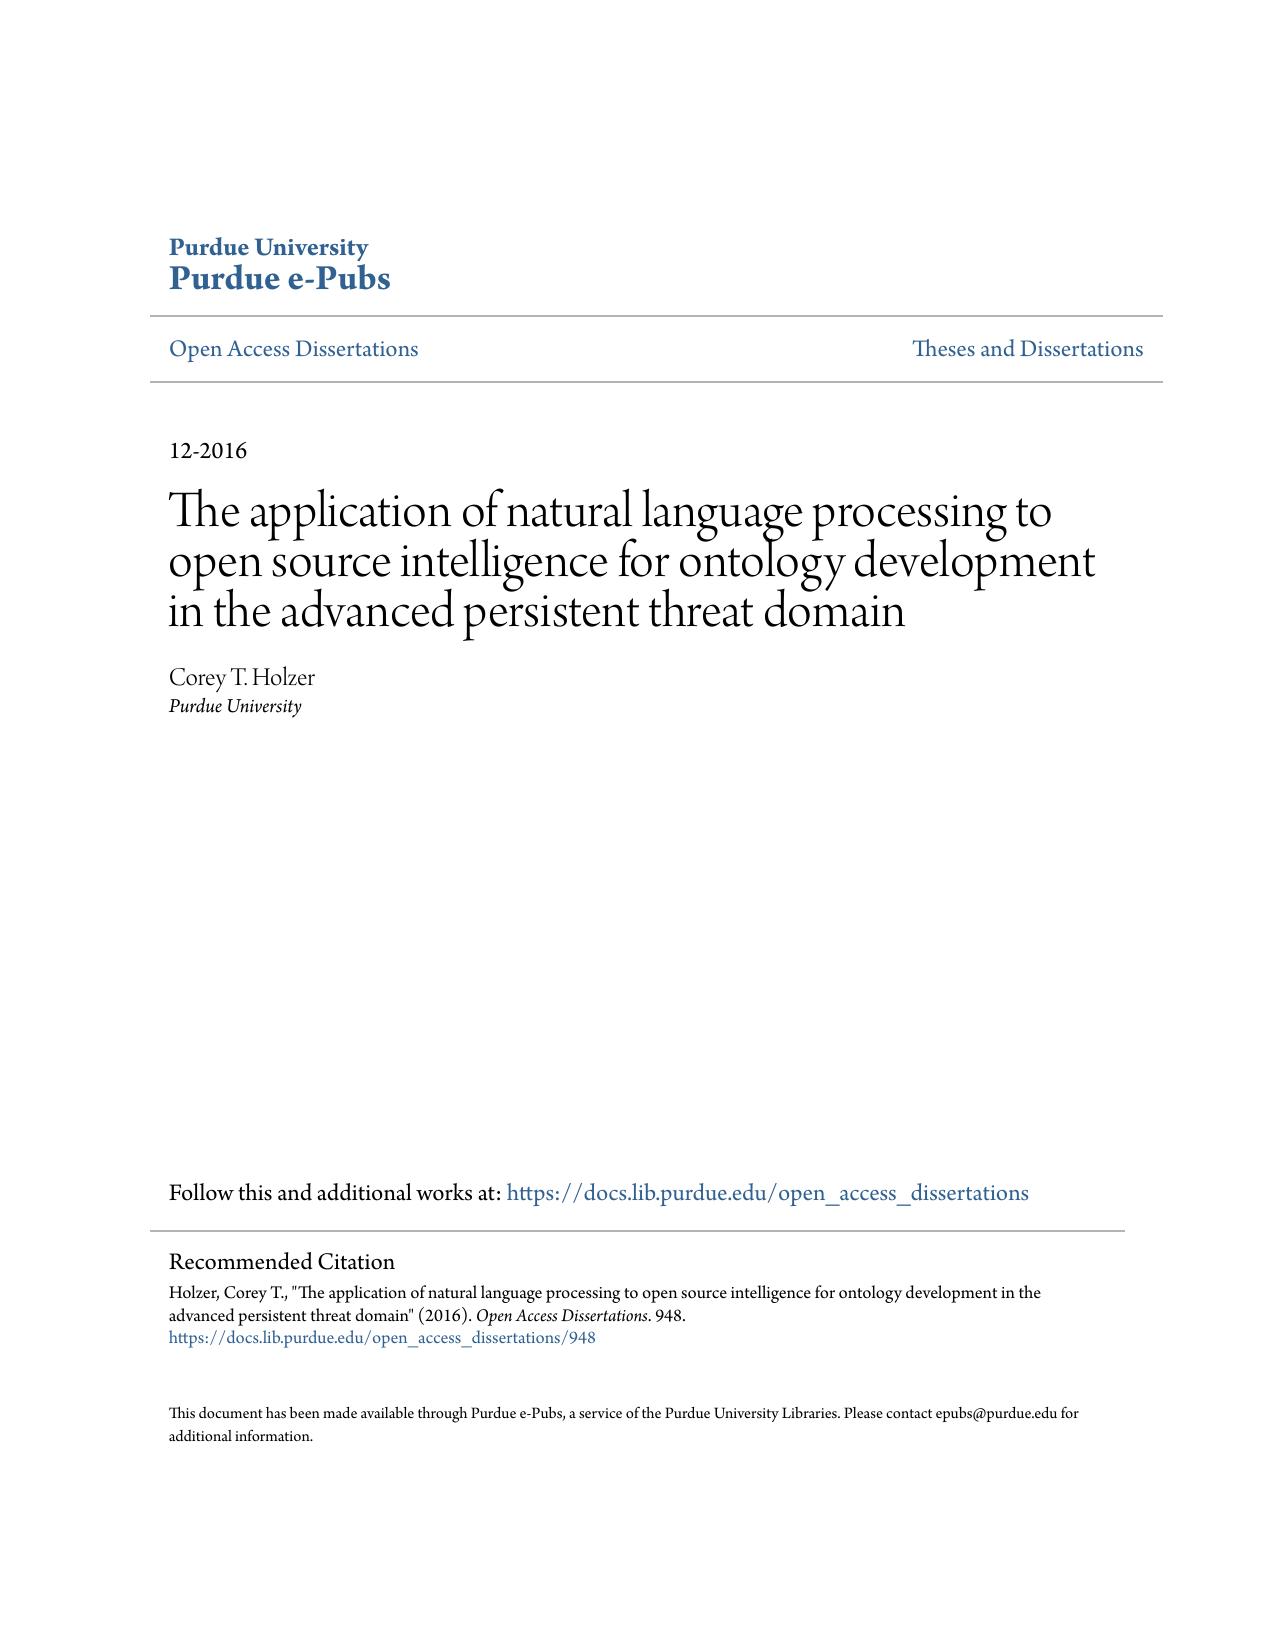 The application of natural language processing to open source intelligence for ontology development in the advanced persistent threat domain